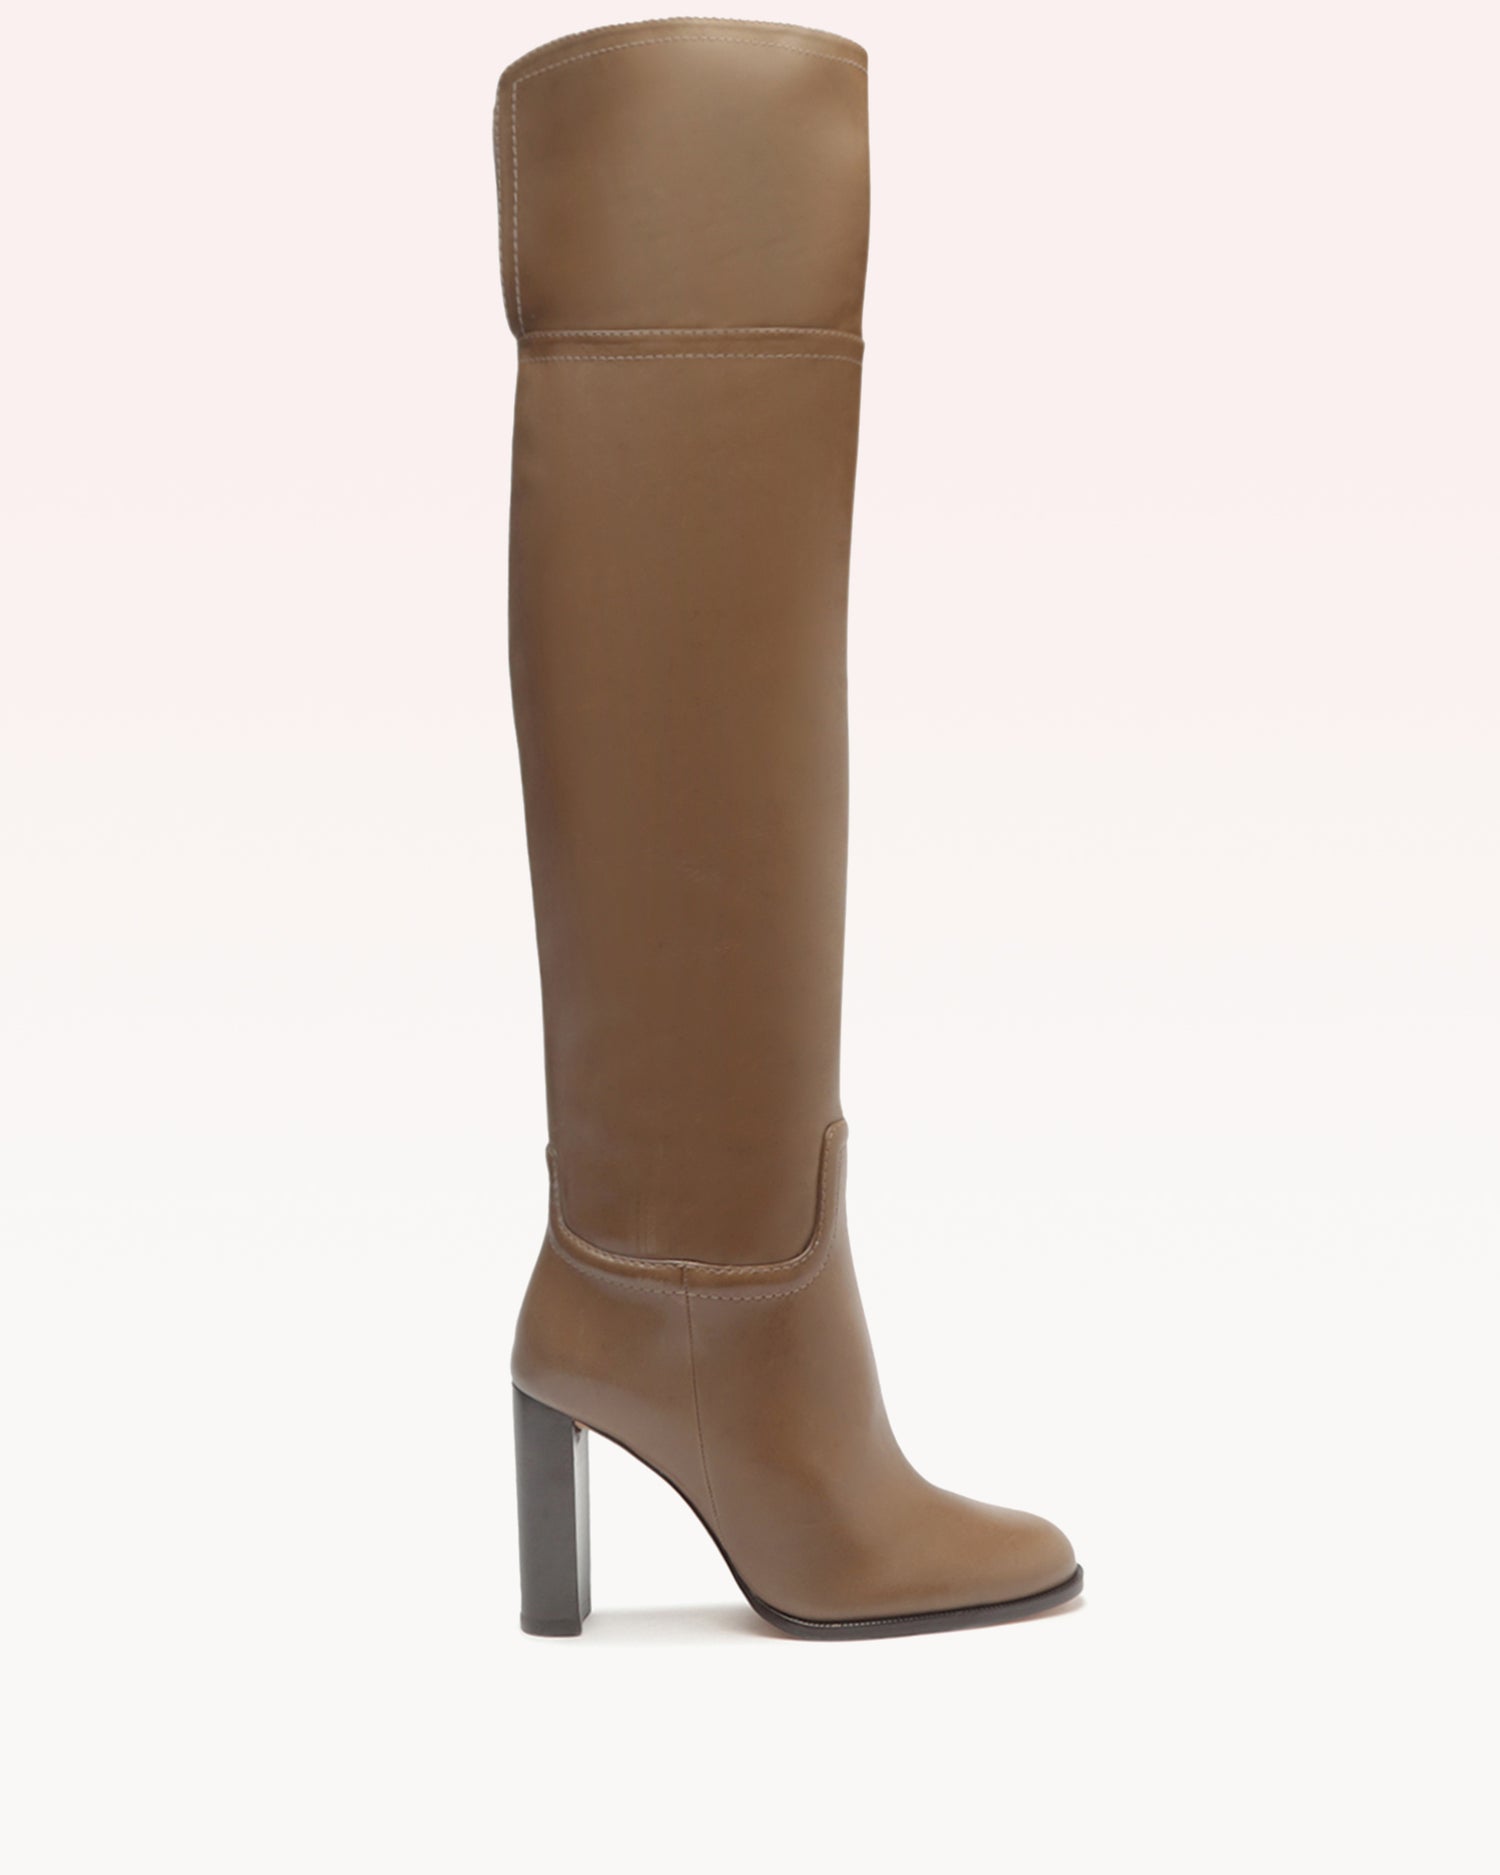 Lauren Over the Knee 90 Boot Tan Boots F/23 35 Tan Calf Leather